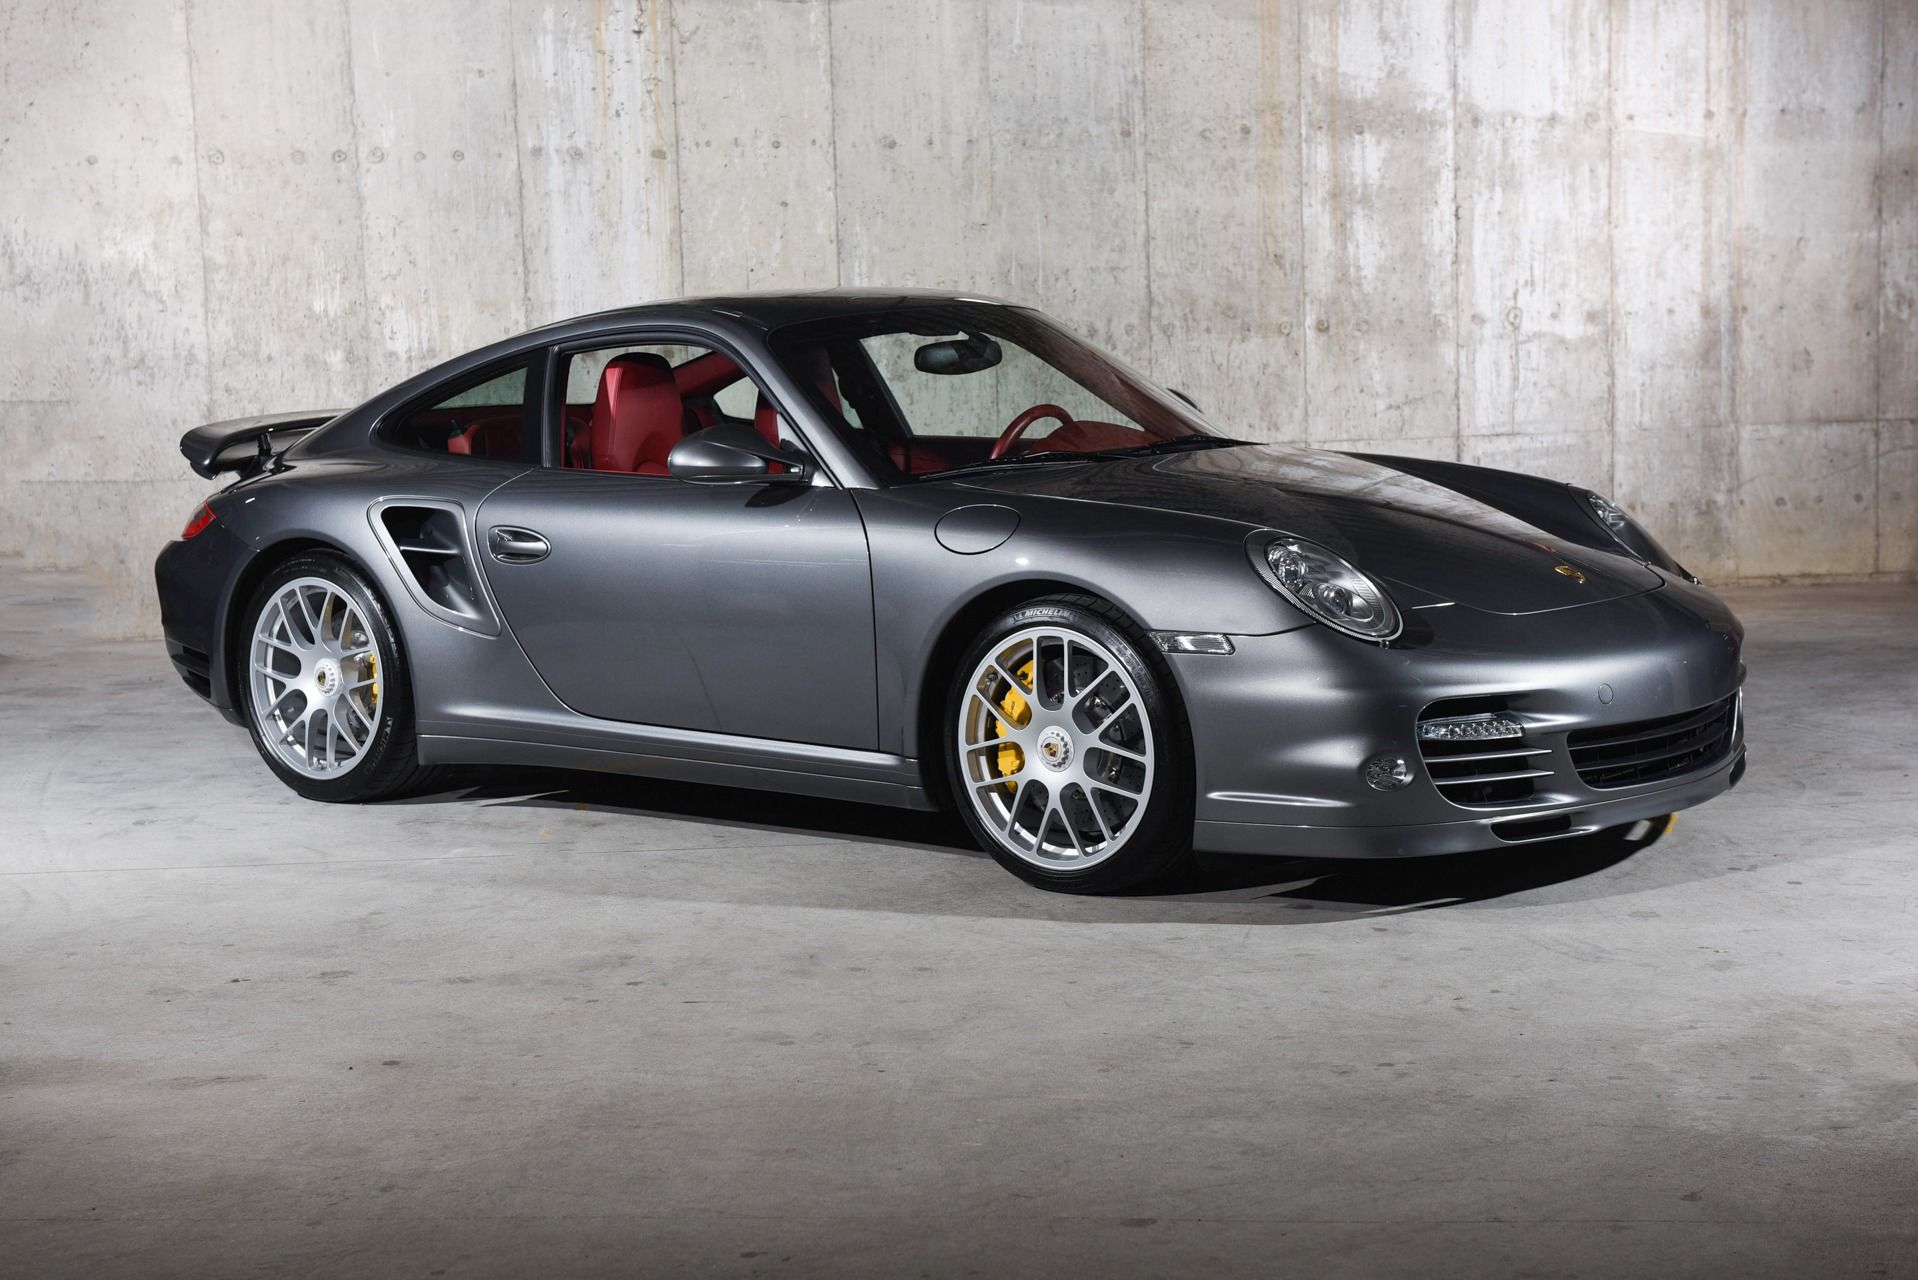 the 2012 Porsche 997.2 911 Turbo at a parking